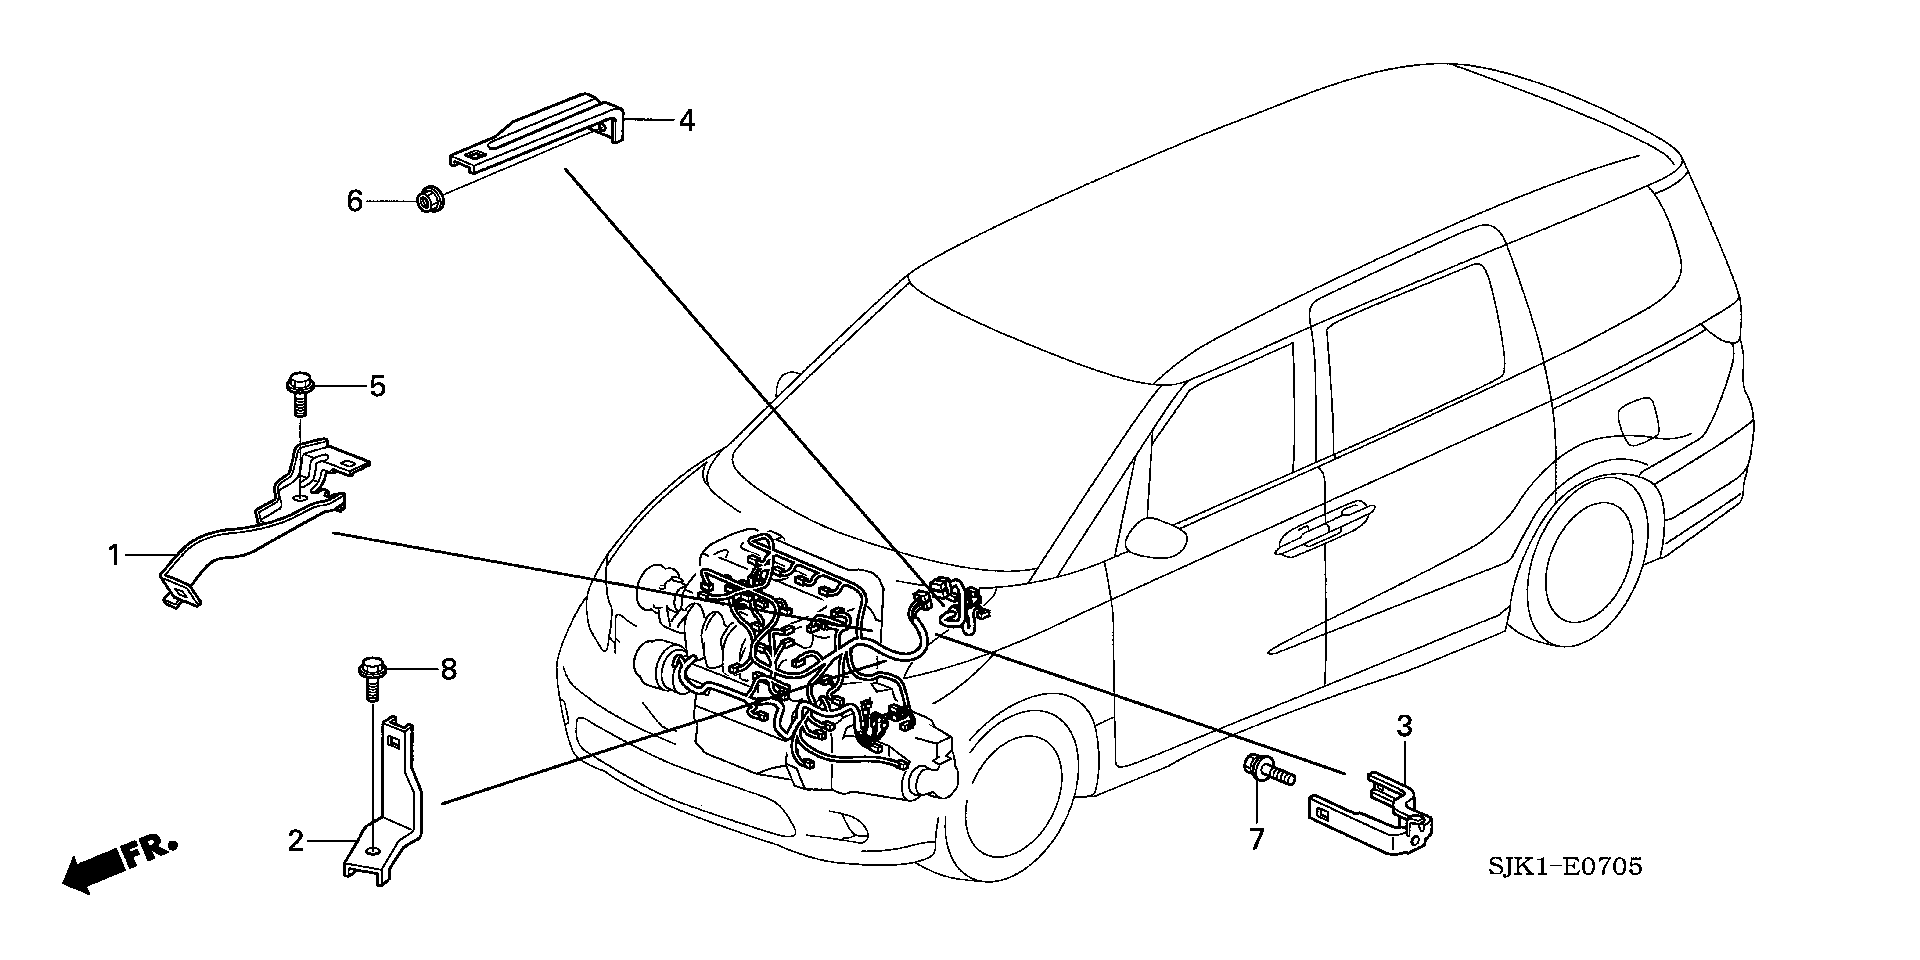 ENGINE WIRE HARNESS STAY(L4)